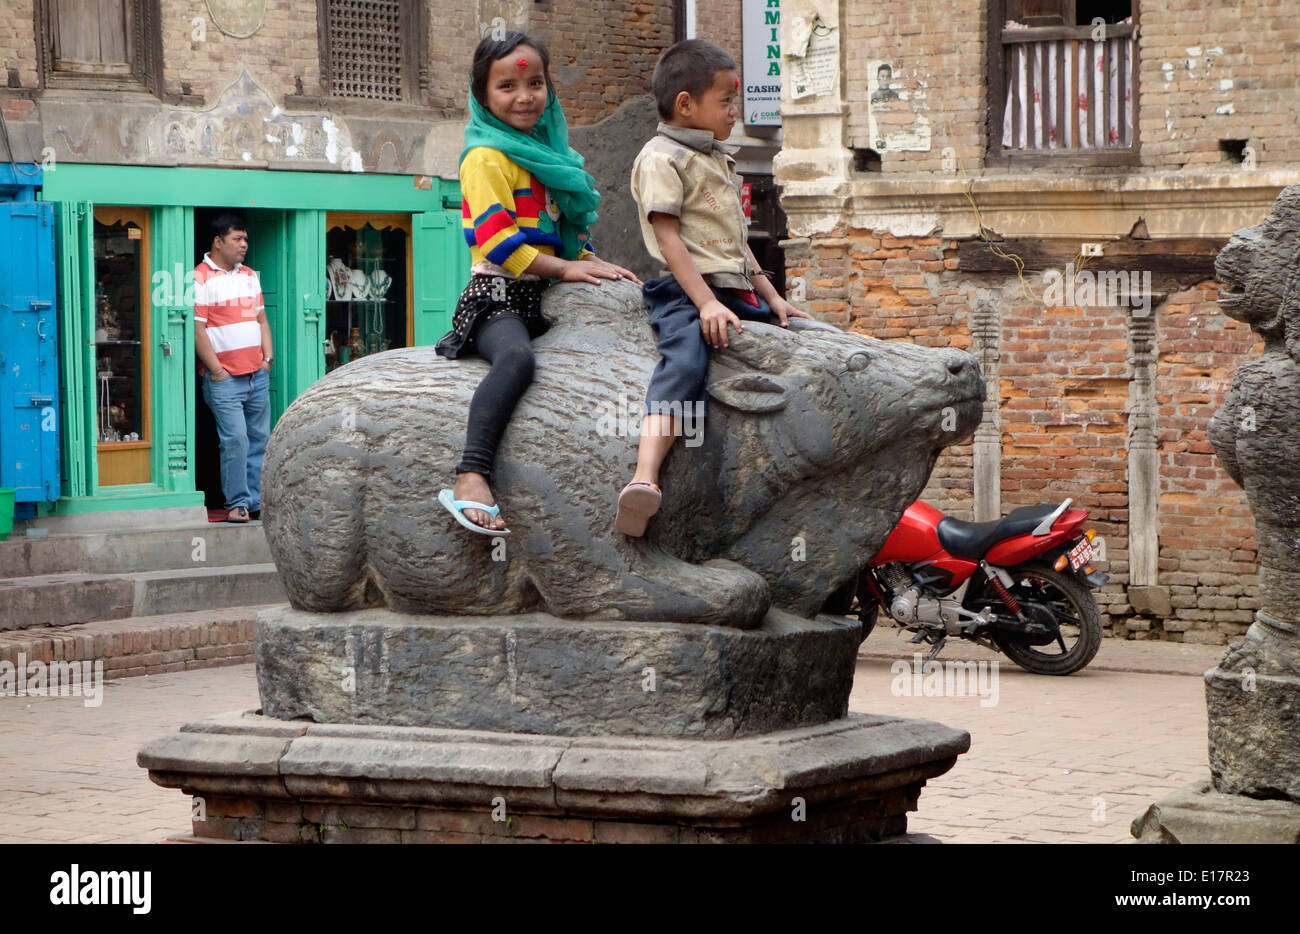 Children, Nepal,Asia,candid  street, scenes photos,coldly, cute, photography,Kids playing on statue. Stock Photo